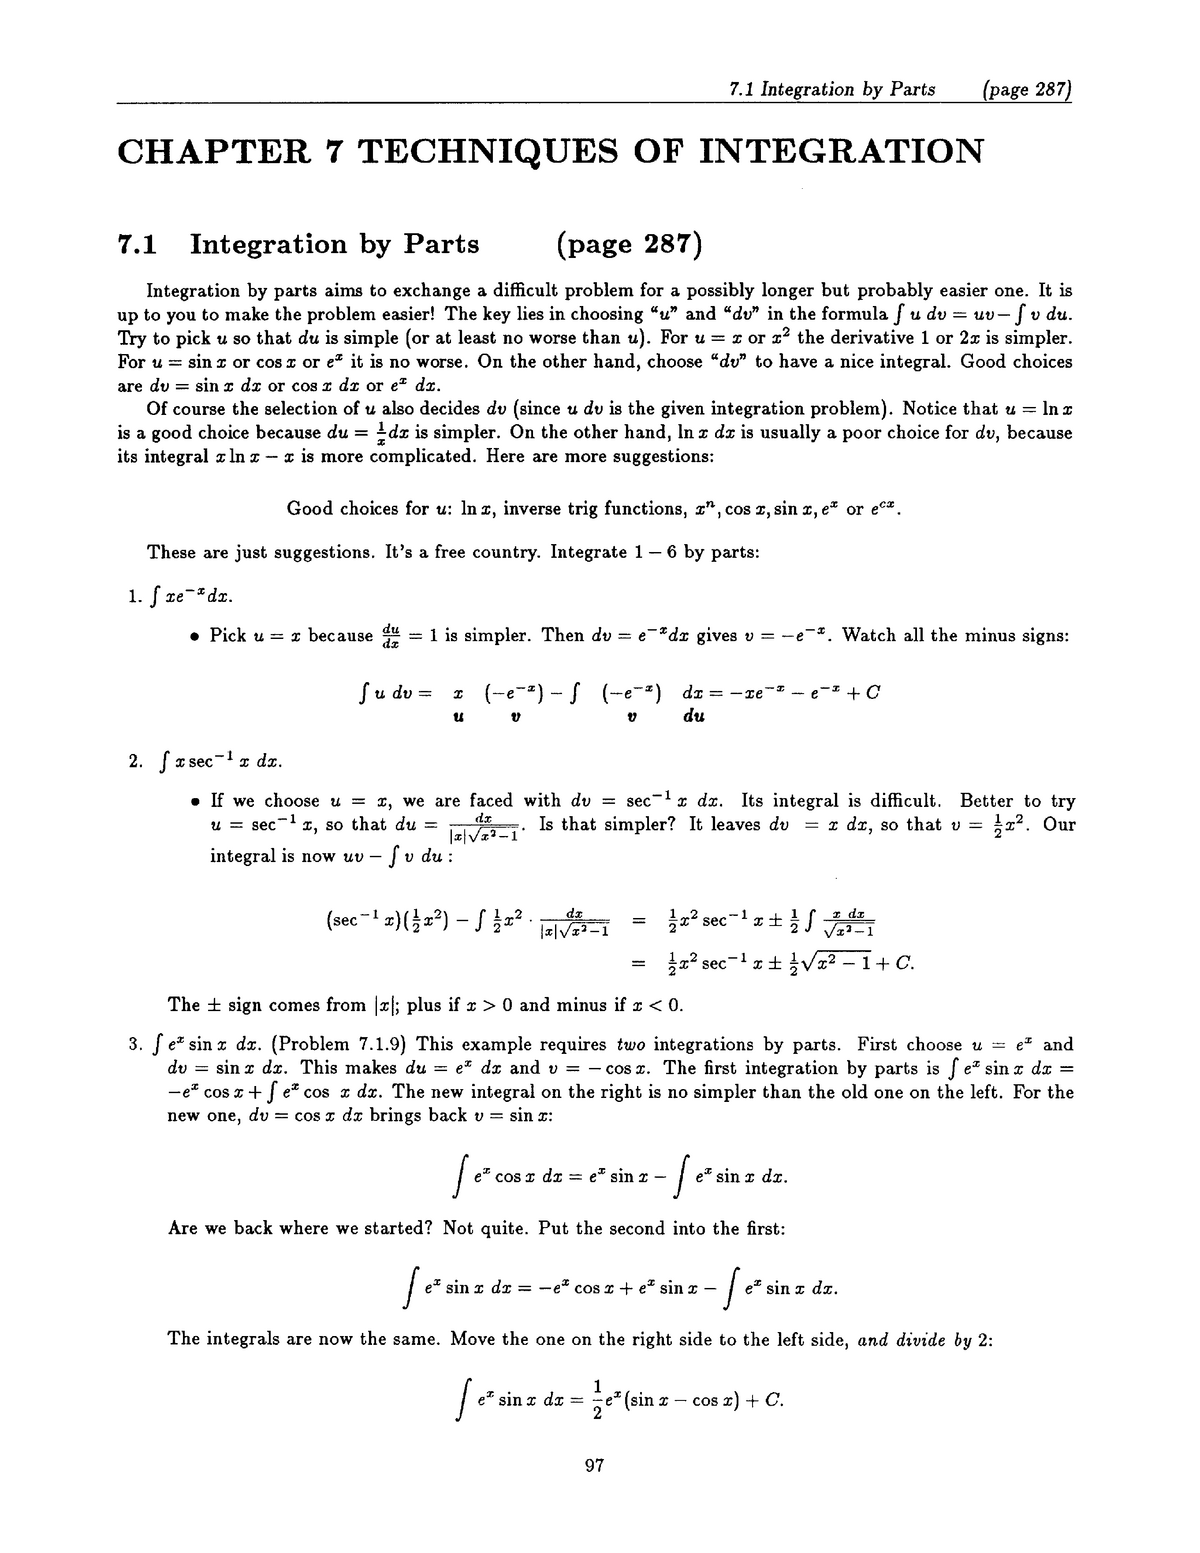 Techniques Of Integration 7 page287 CHAPTER 7 TECHNIQUES OF 